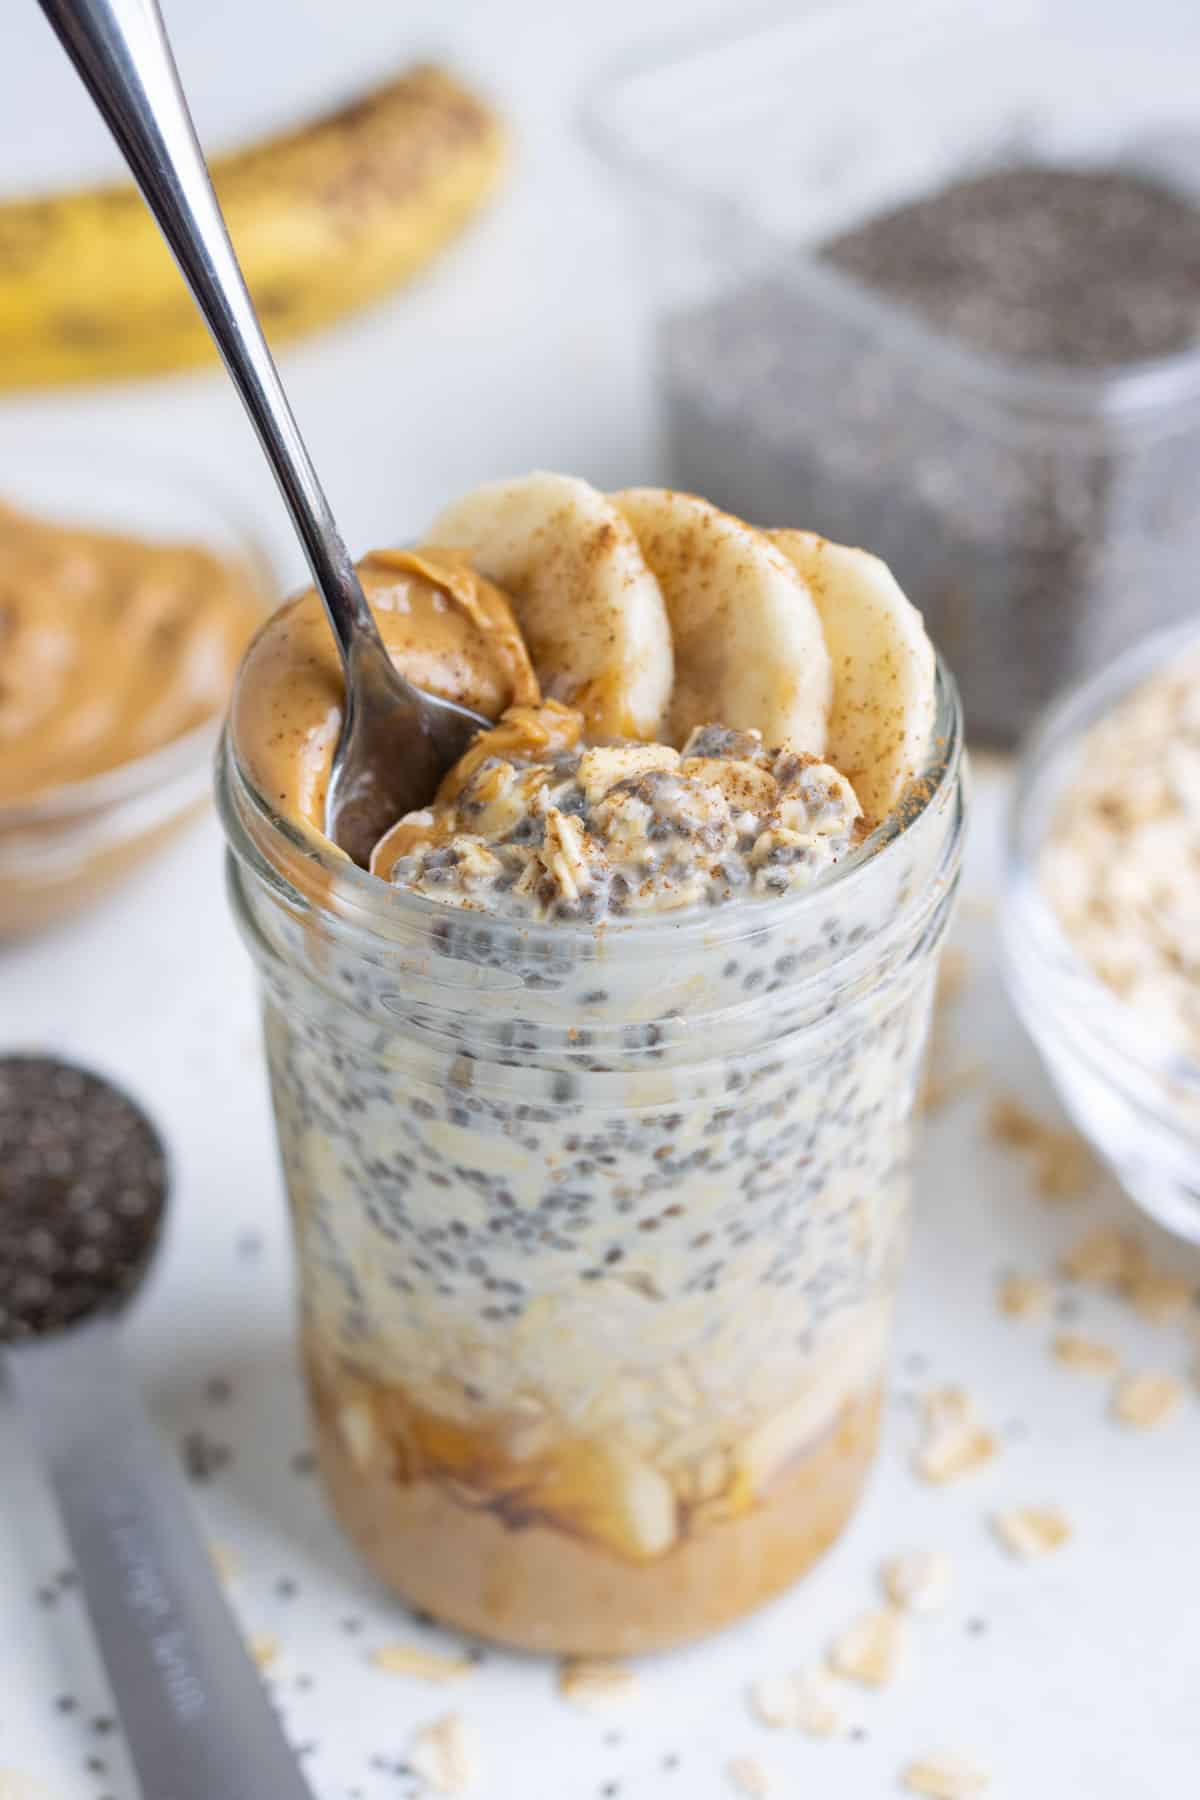 Overnight oats with PB and bananas are the perfect make-ahead recipe.